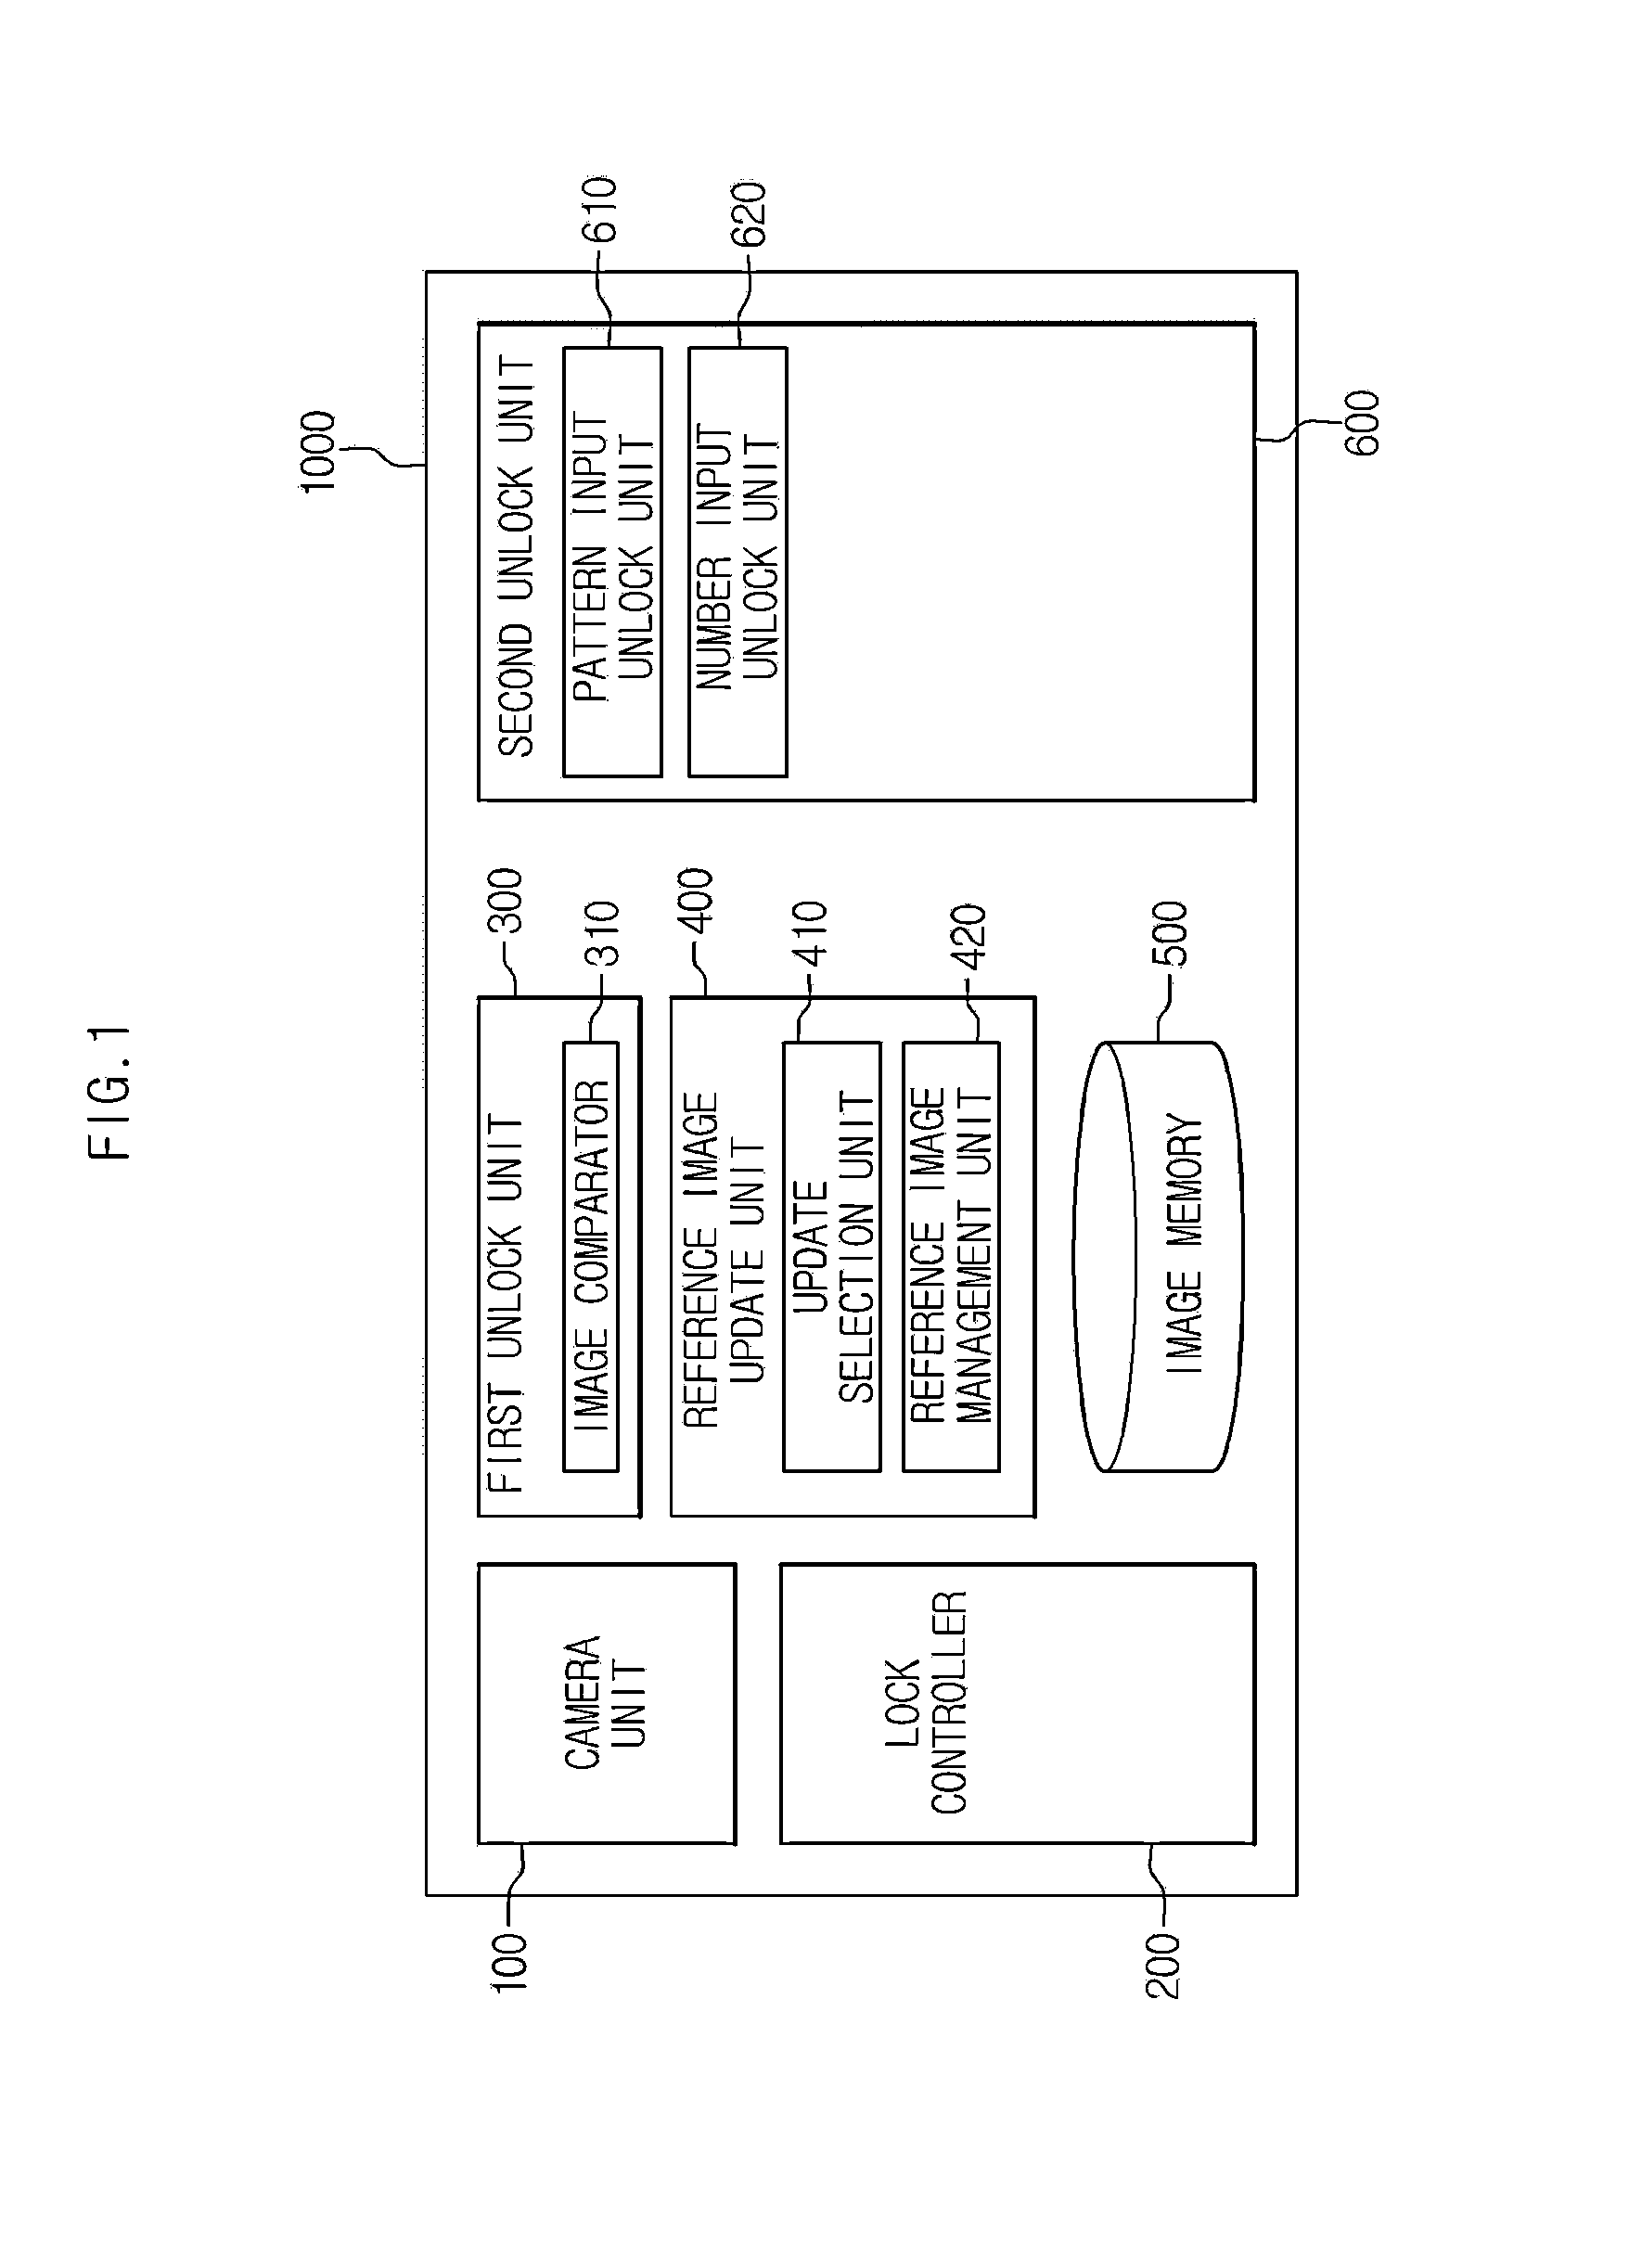 Electronic device and method for user identification